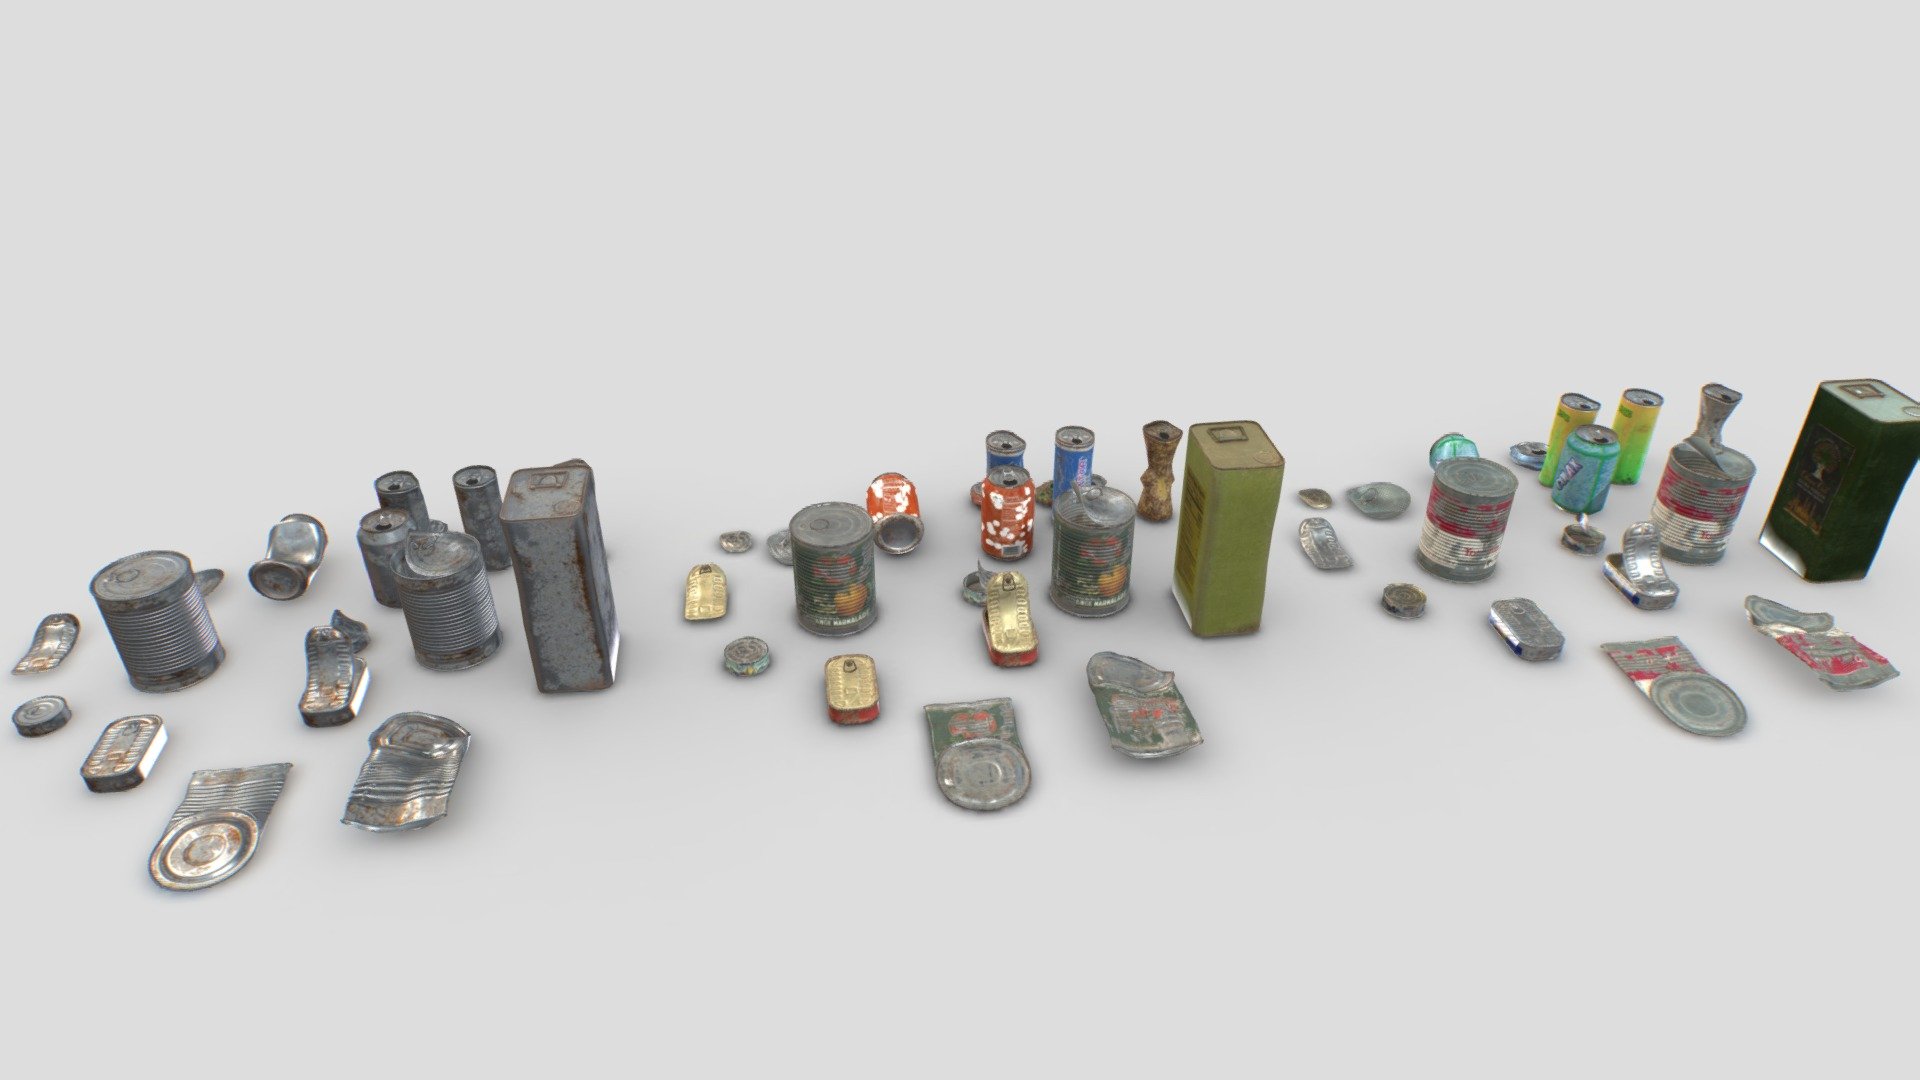 Pack of cans junk . Realistic scale. Includes drink, food and oil cans. 19 meshes.

Each object comes with 3 texture sets (materials), for a total of 57 different objects and 3 materials. Each mesh use 1 material only.

PBR 4096x PBR textures including Albedo, Normal, Metalness, Roughness and AO. Unreal ARM mask texture included (ao, rough, metal). Also unity HDRP mask included.

17k verts and 33k tris in total.

Suitable for garages, landfill, street trash, apocalyptic scenes, etc&hellip; - Cans junk props - Buy Royalty Free 3D model by 32cm 3d model